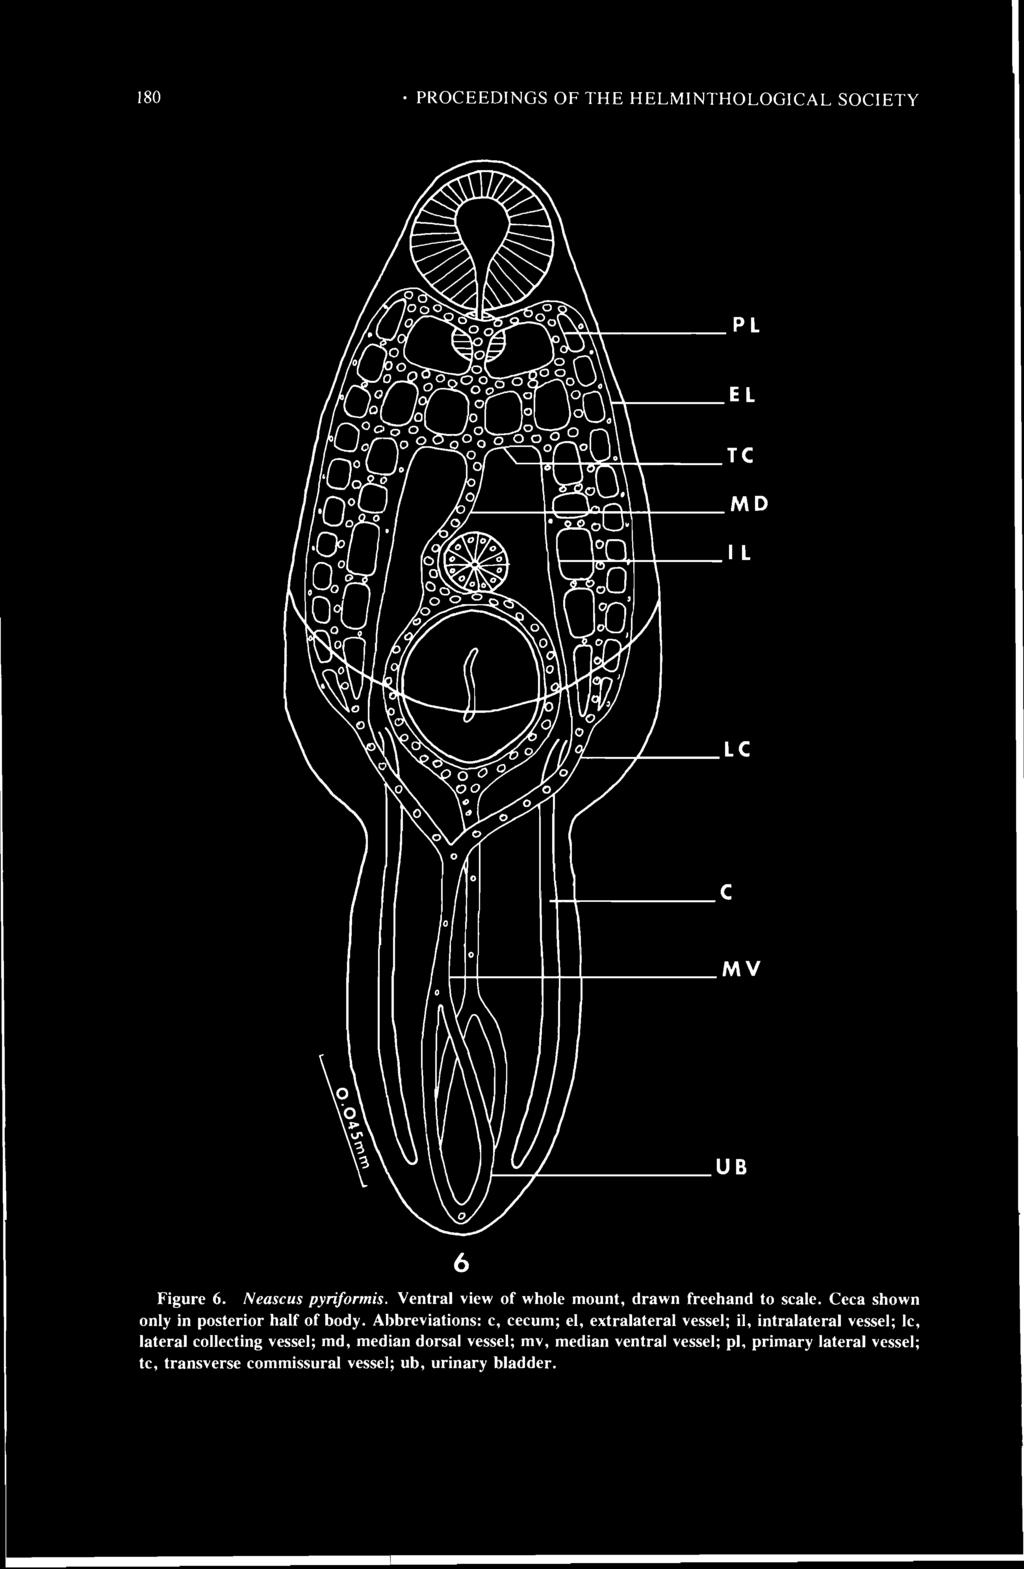 180 PROCEEDINGS OF THE HELMINTHOLOGICAL SOCIETY MV UB Figure 6. Neascus pyriformis. Ventral view of whole mount, drawn freehand to scale. Ceca shown only in posterior half of body.